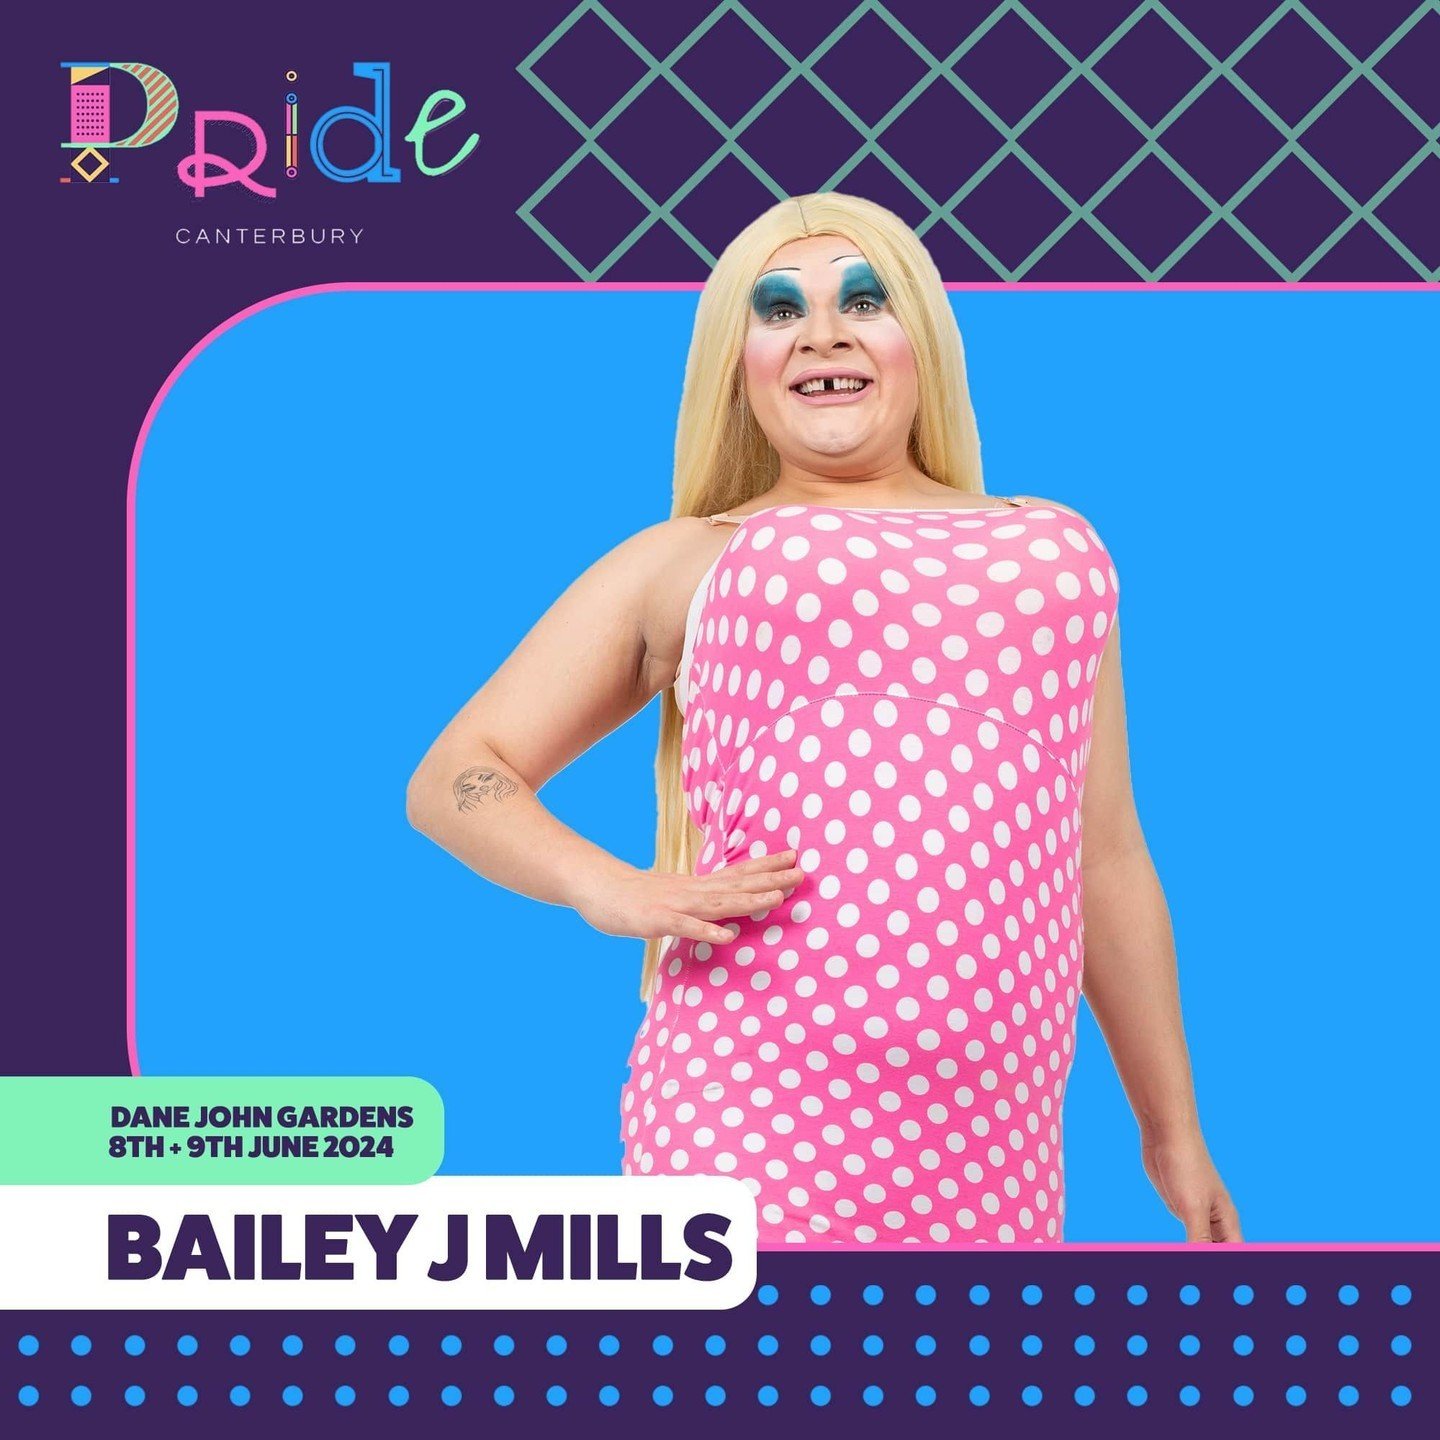 📣 Pride Canterbury 2024 line-up Announcement 

@baileyjmills99 
Everyone's favourite Tik Tok Star is coming to see us at Pride. We can't wait to welcome her to Canterbury.

@kmfmofficial Floorfiller Anthems Live 
Rob Wills from KMFM is back and will